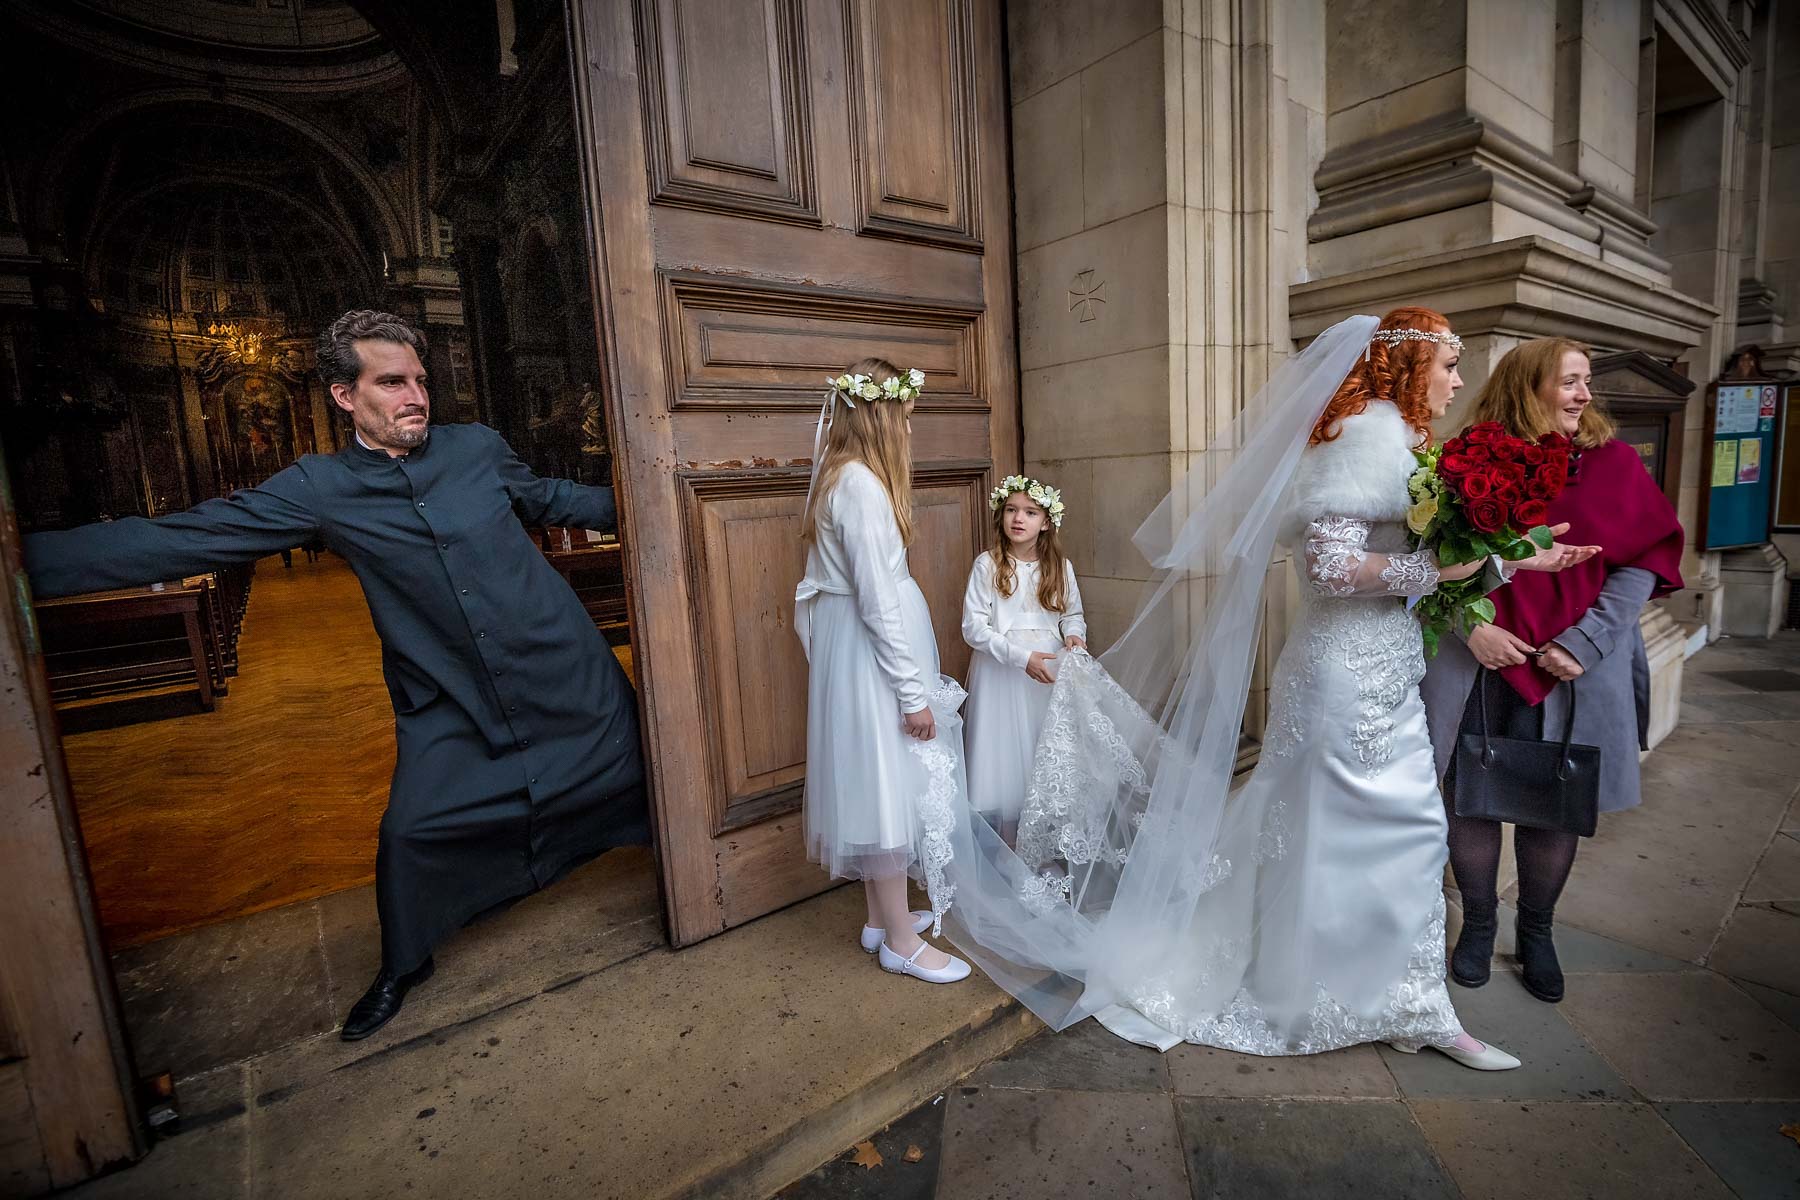 A sacristan closes the main doors at Brompton Oratory whilst the bride chats with a guest after her wedding ceremony